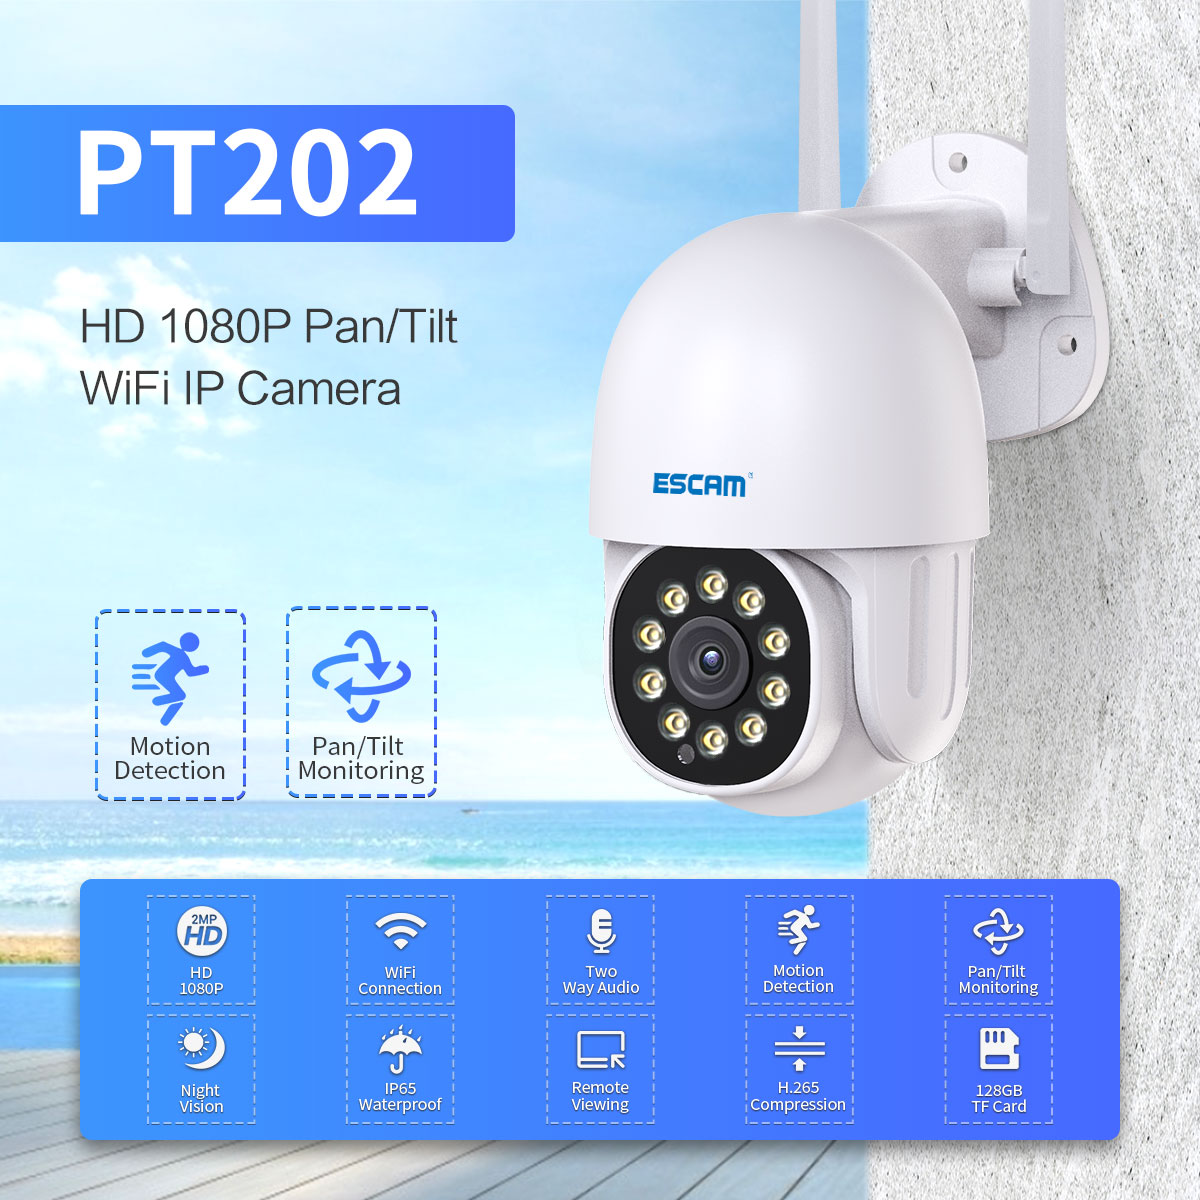 ESCAM-PT202-1080P-WiFi-IP-Camera-Infrared-Night-Vision-Waterproof-With-Motions-Detection-And-Automat-1784296-1